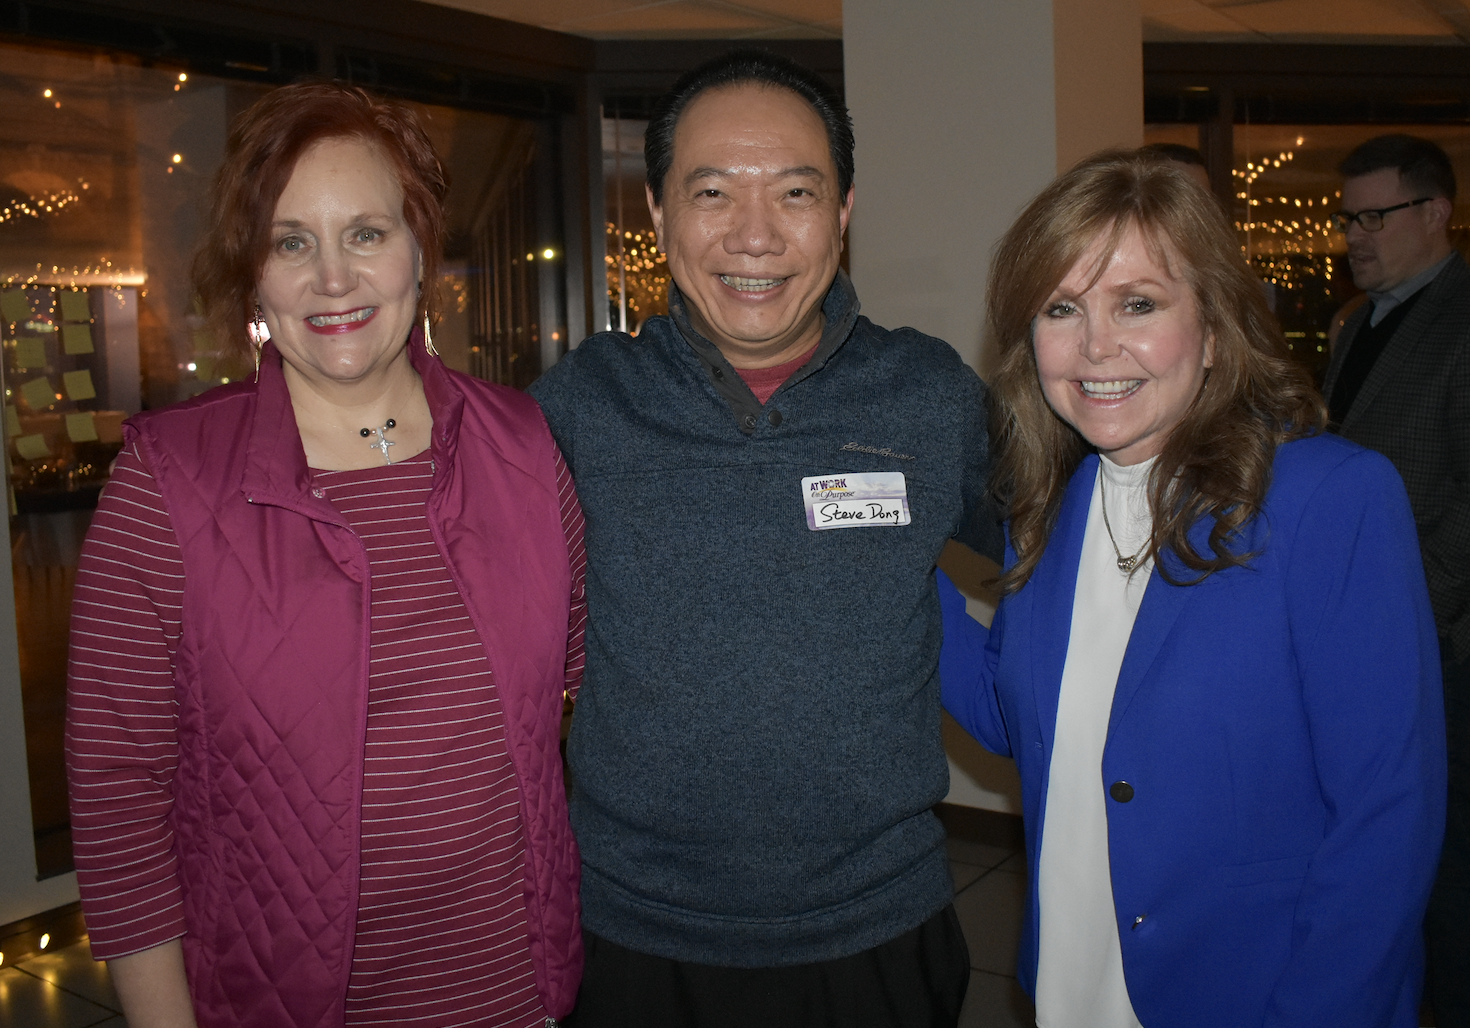 From left to right: Linda and Steve Dong of Human Capital Solutions, and Barbara Hogan, founder, president and CEO of Timbelo. (Photo provided)